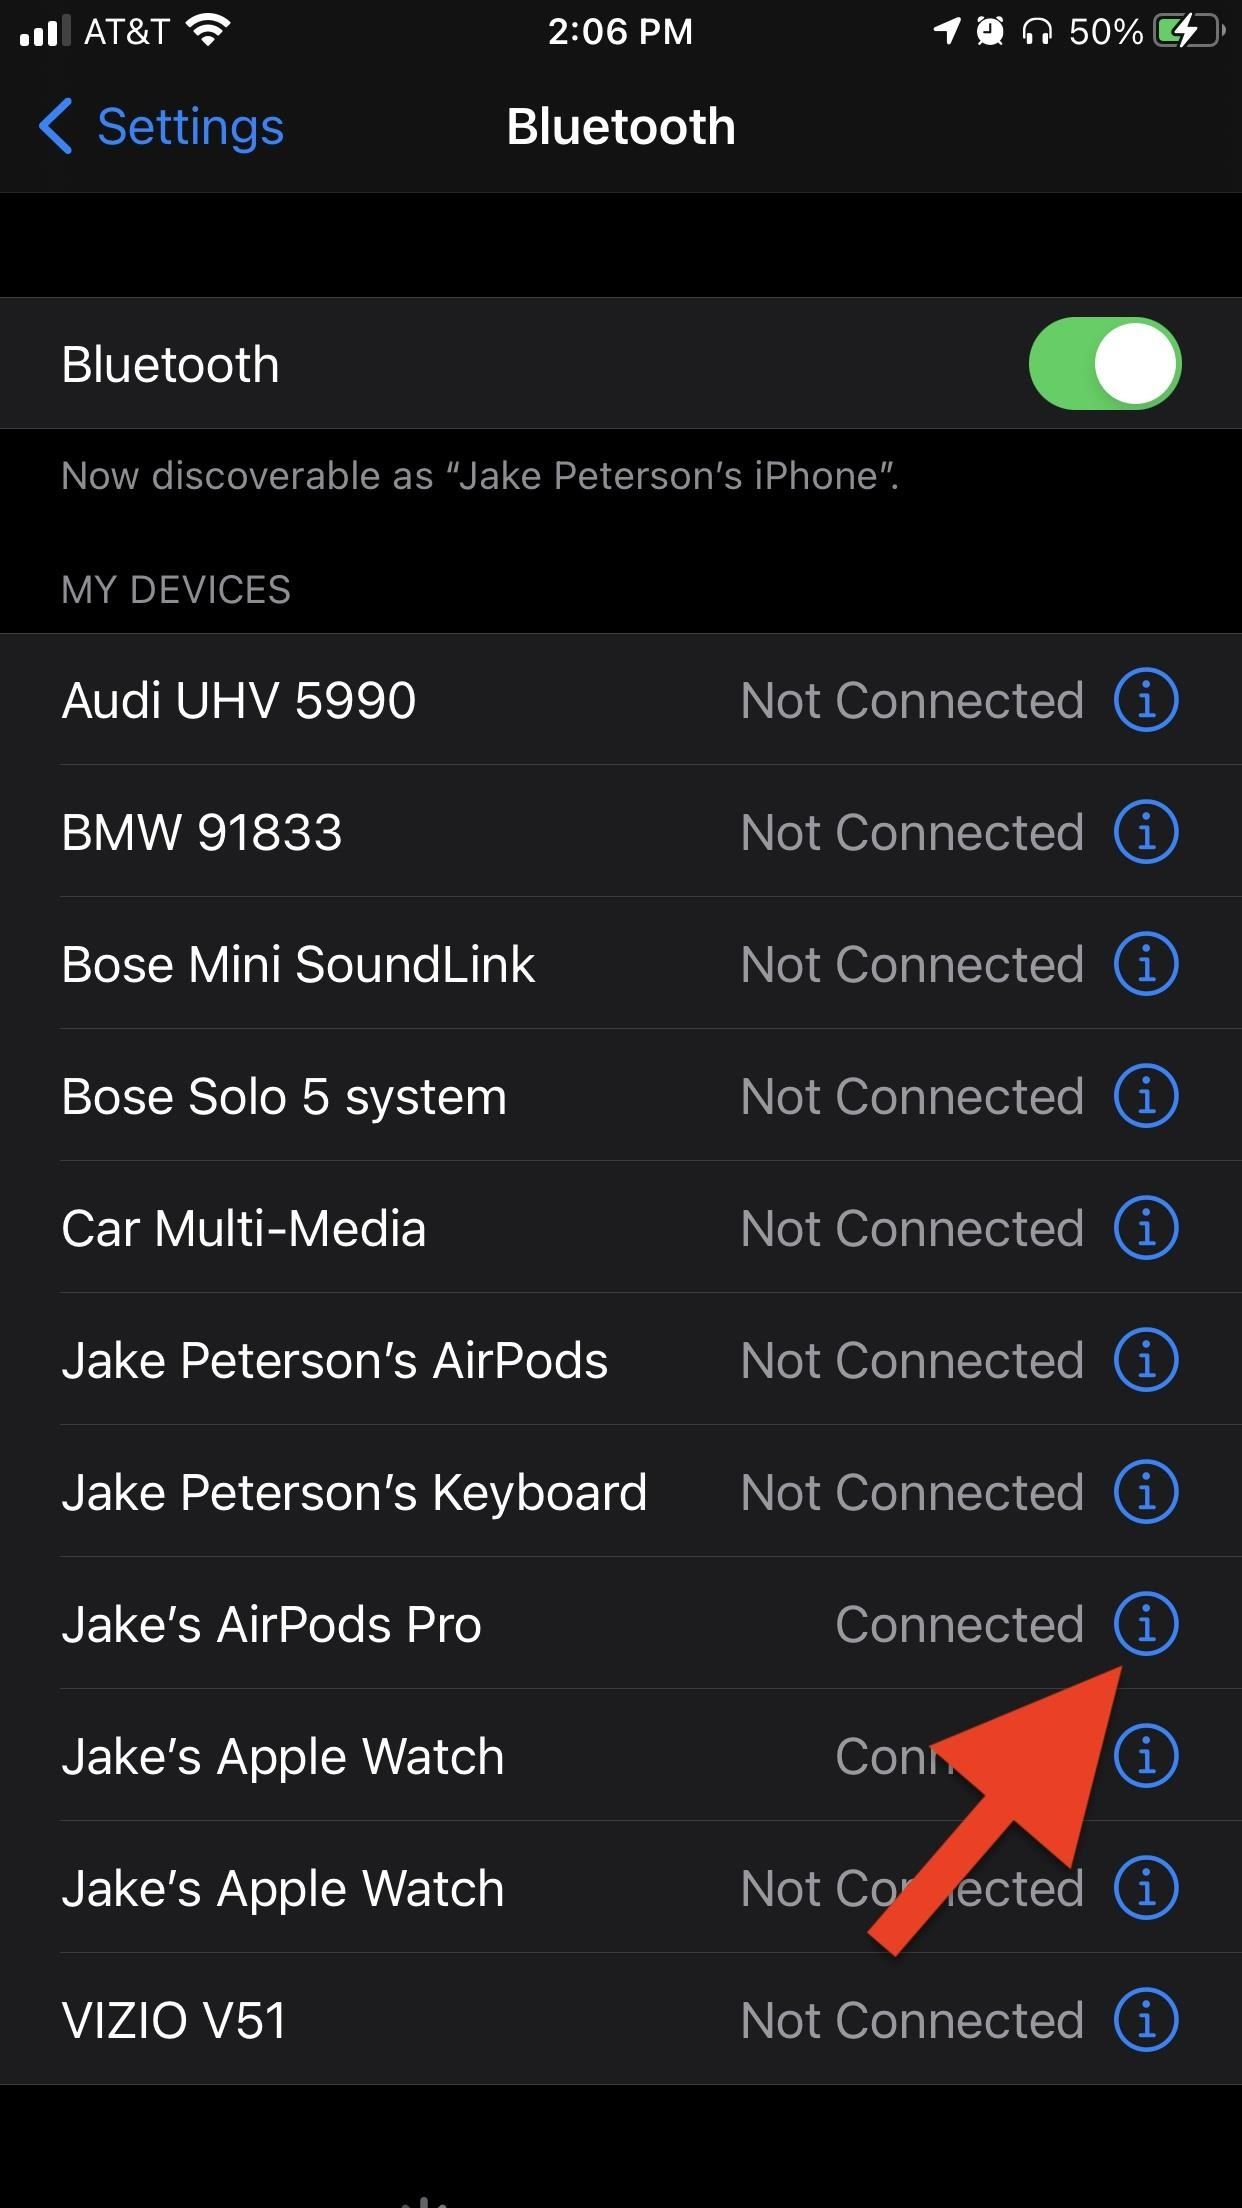 How to Turn Transparency or Noise Cancellation Off Using the AirPods Pro Stem